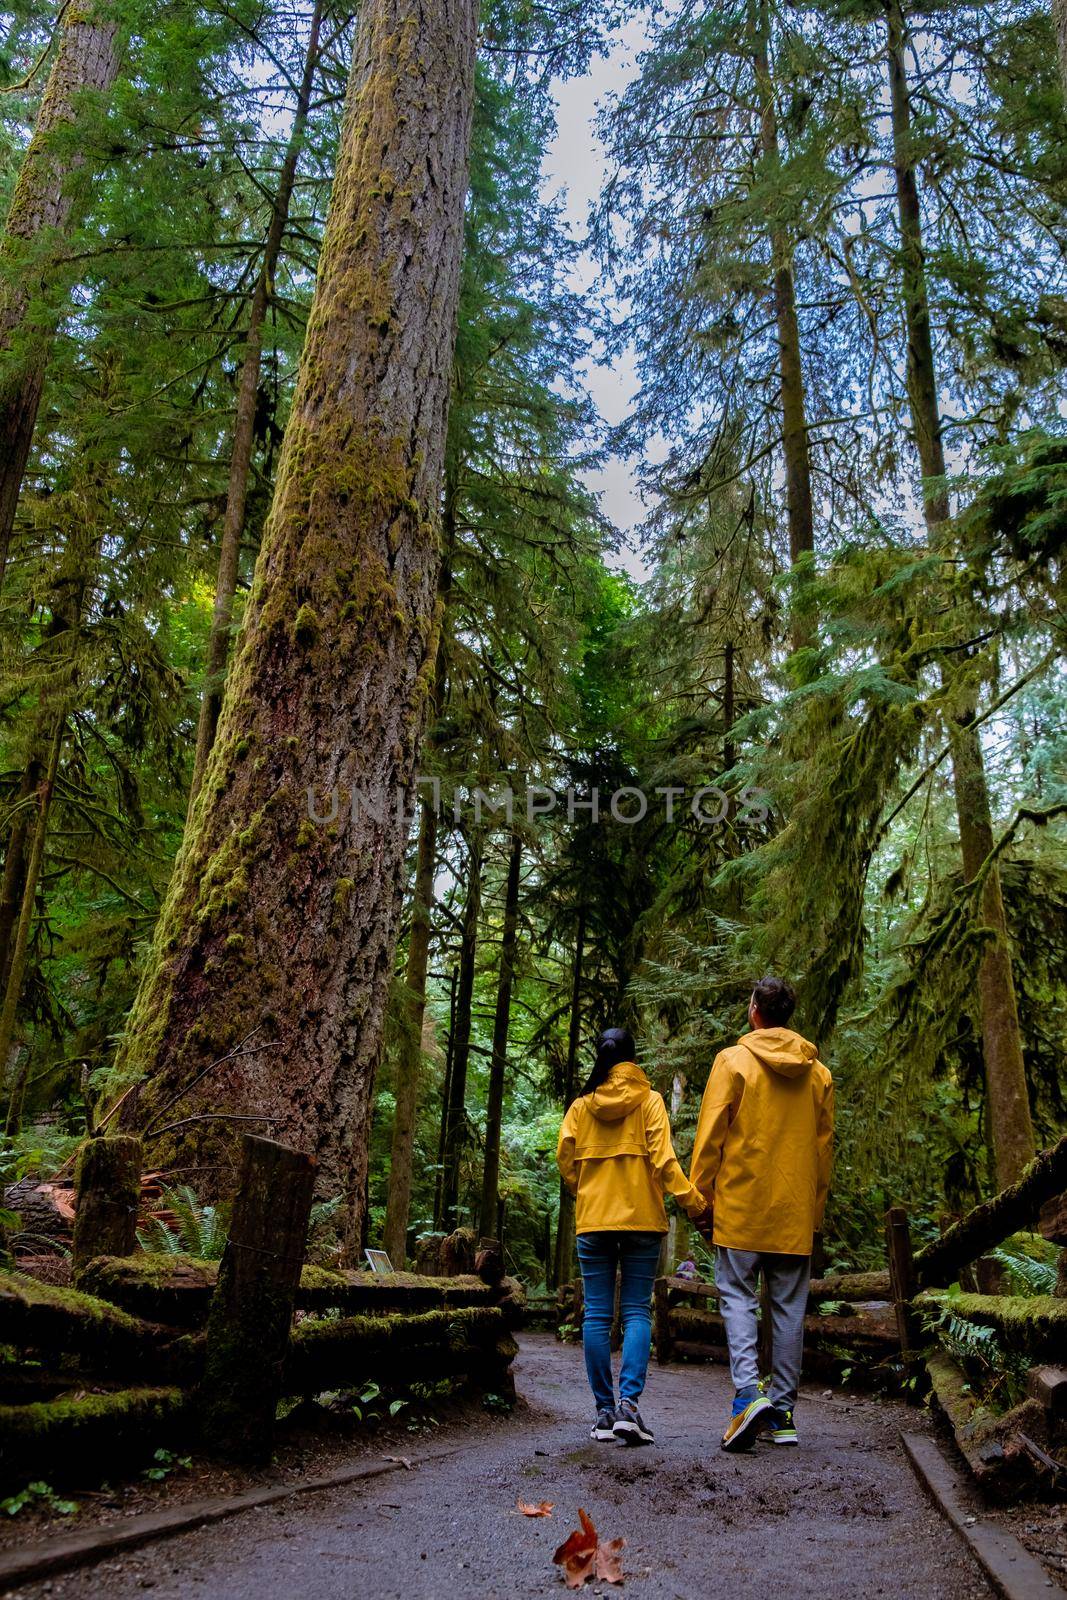 Vancouver Island, Canada, Cathedral Grove park Vancouver Island Canada forest with huge douglas trees and people in yellow rain jacket, rain coat, rainforest with huge woods by fokkebok